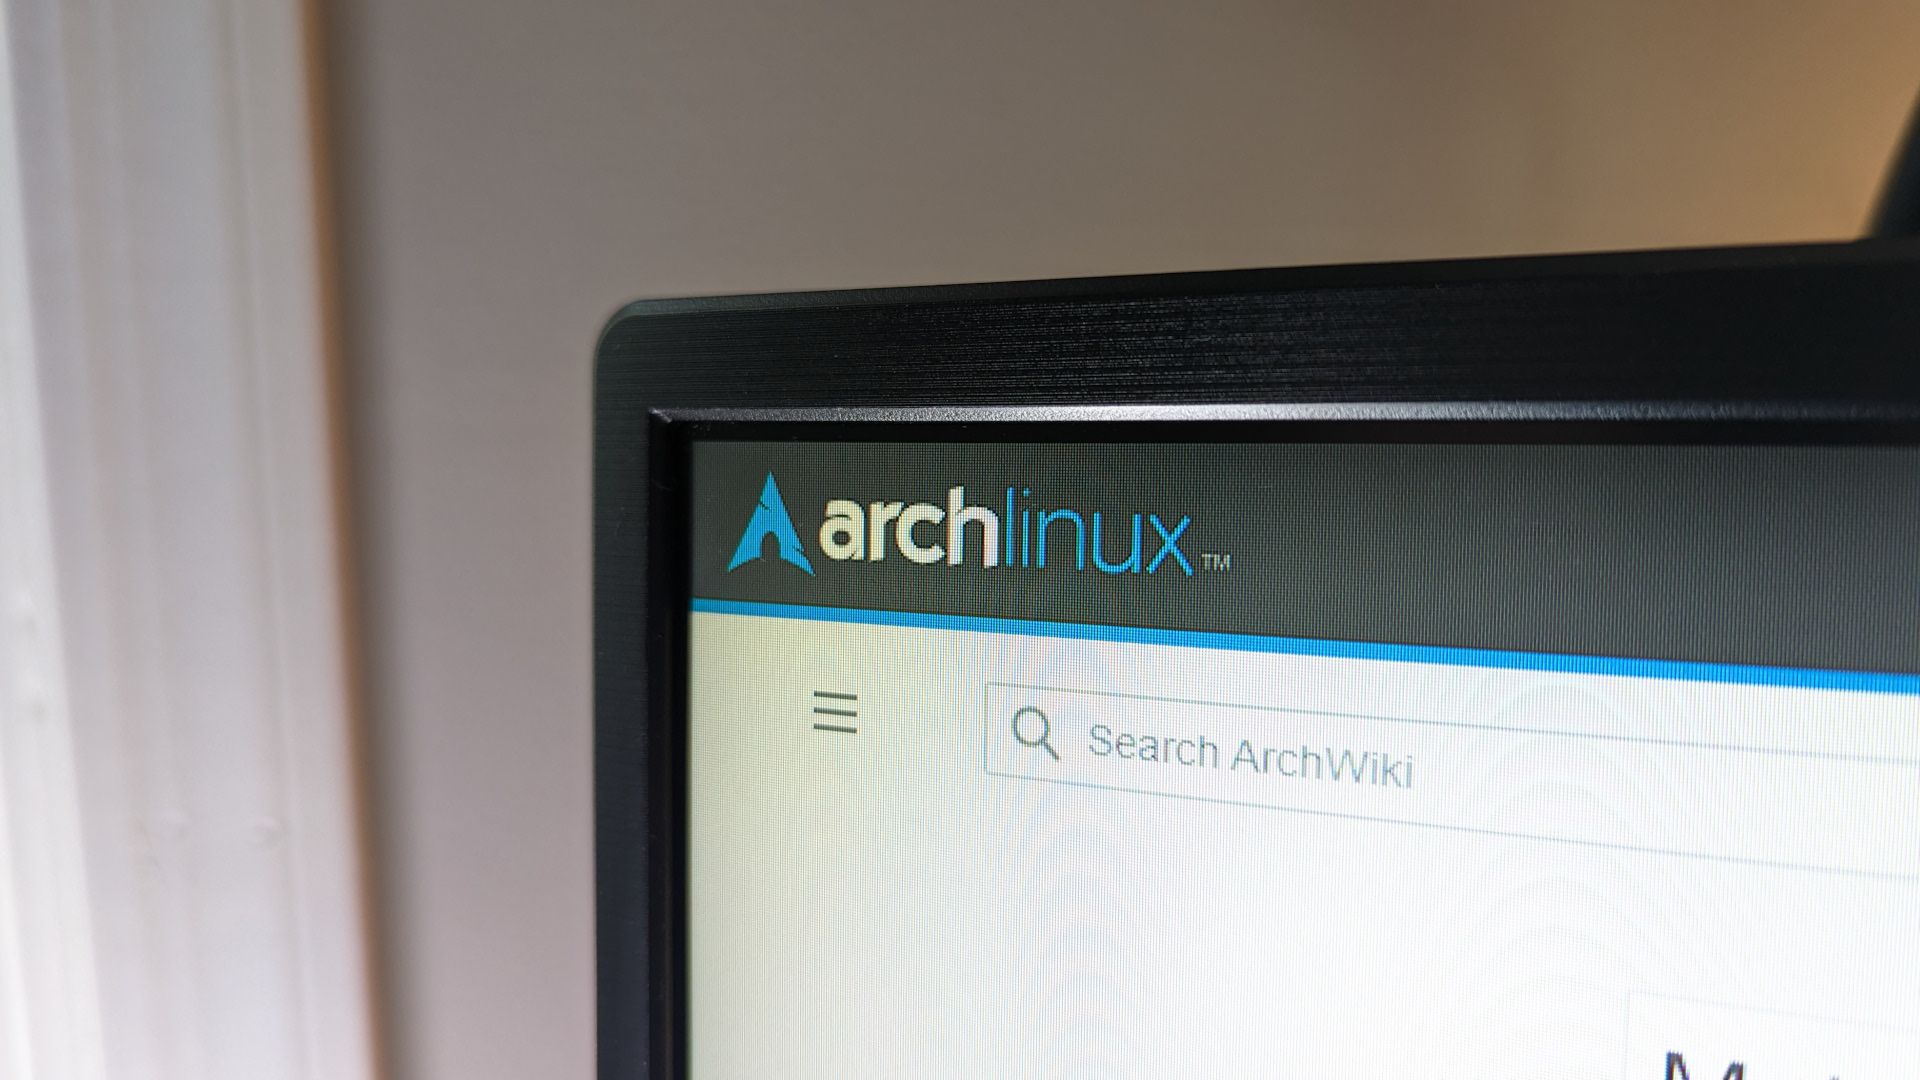 Arch Linux logo on the ArchWiki website.